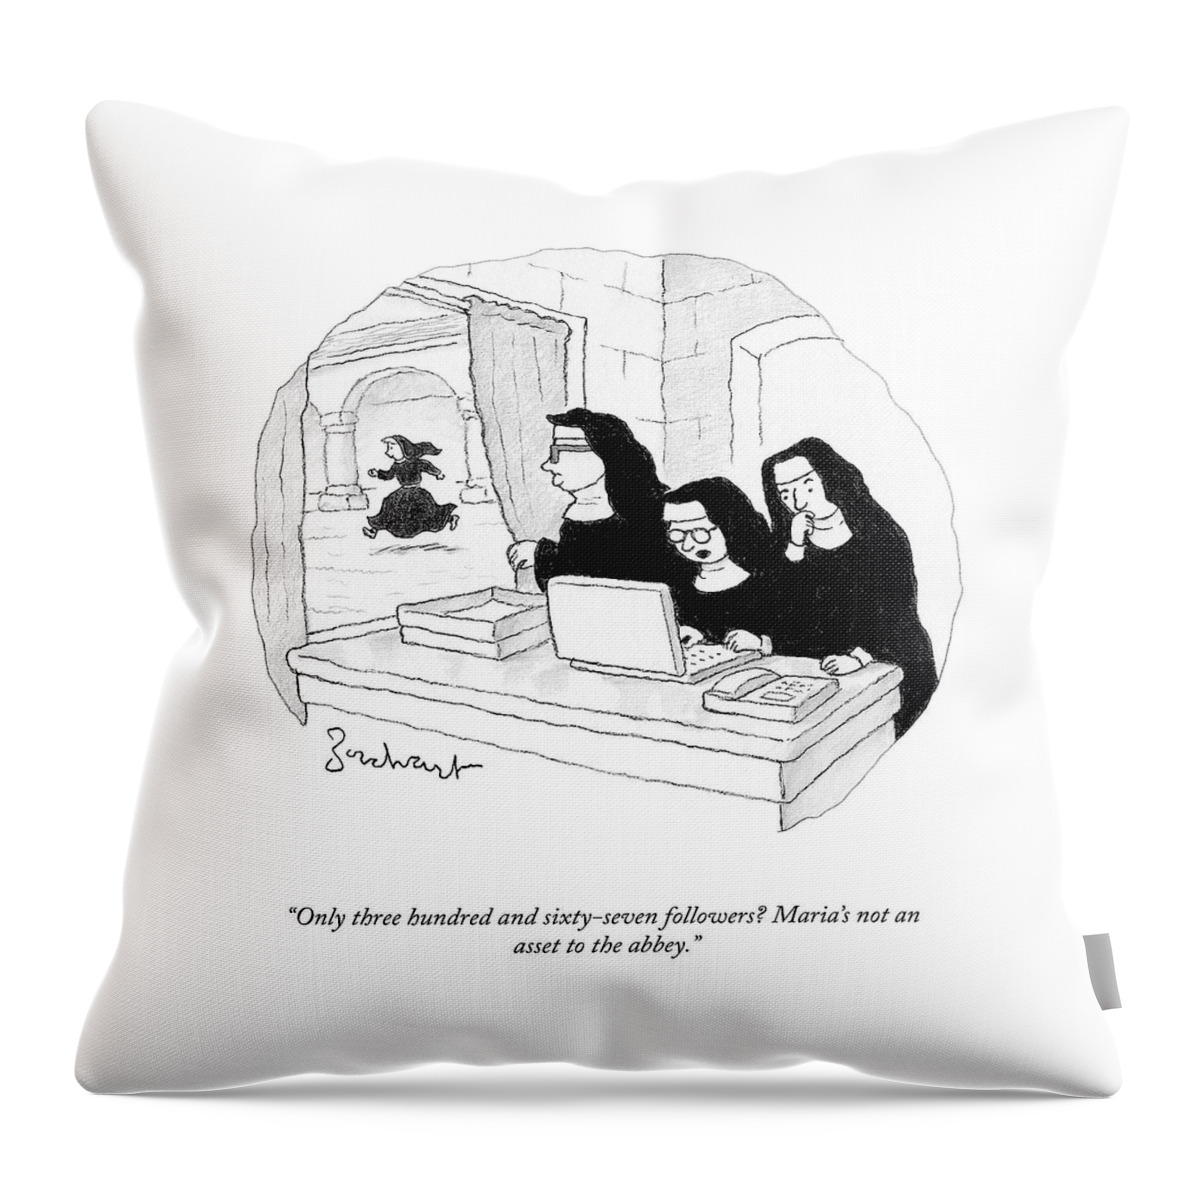 Three Hundred And Sixty Seven Followers Throw Pillow